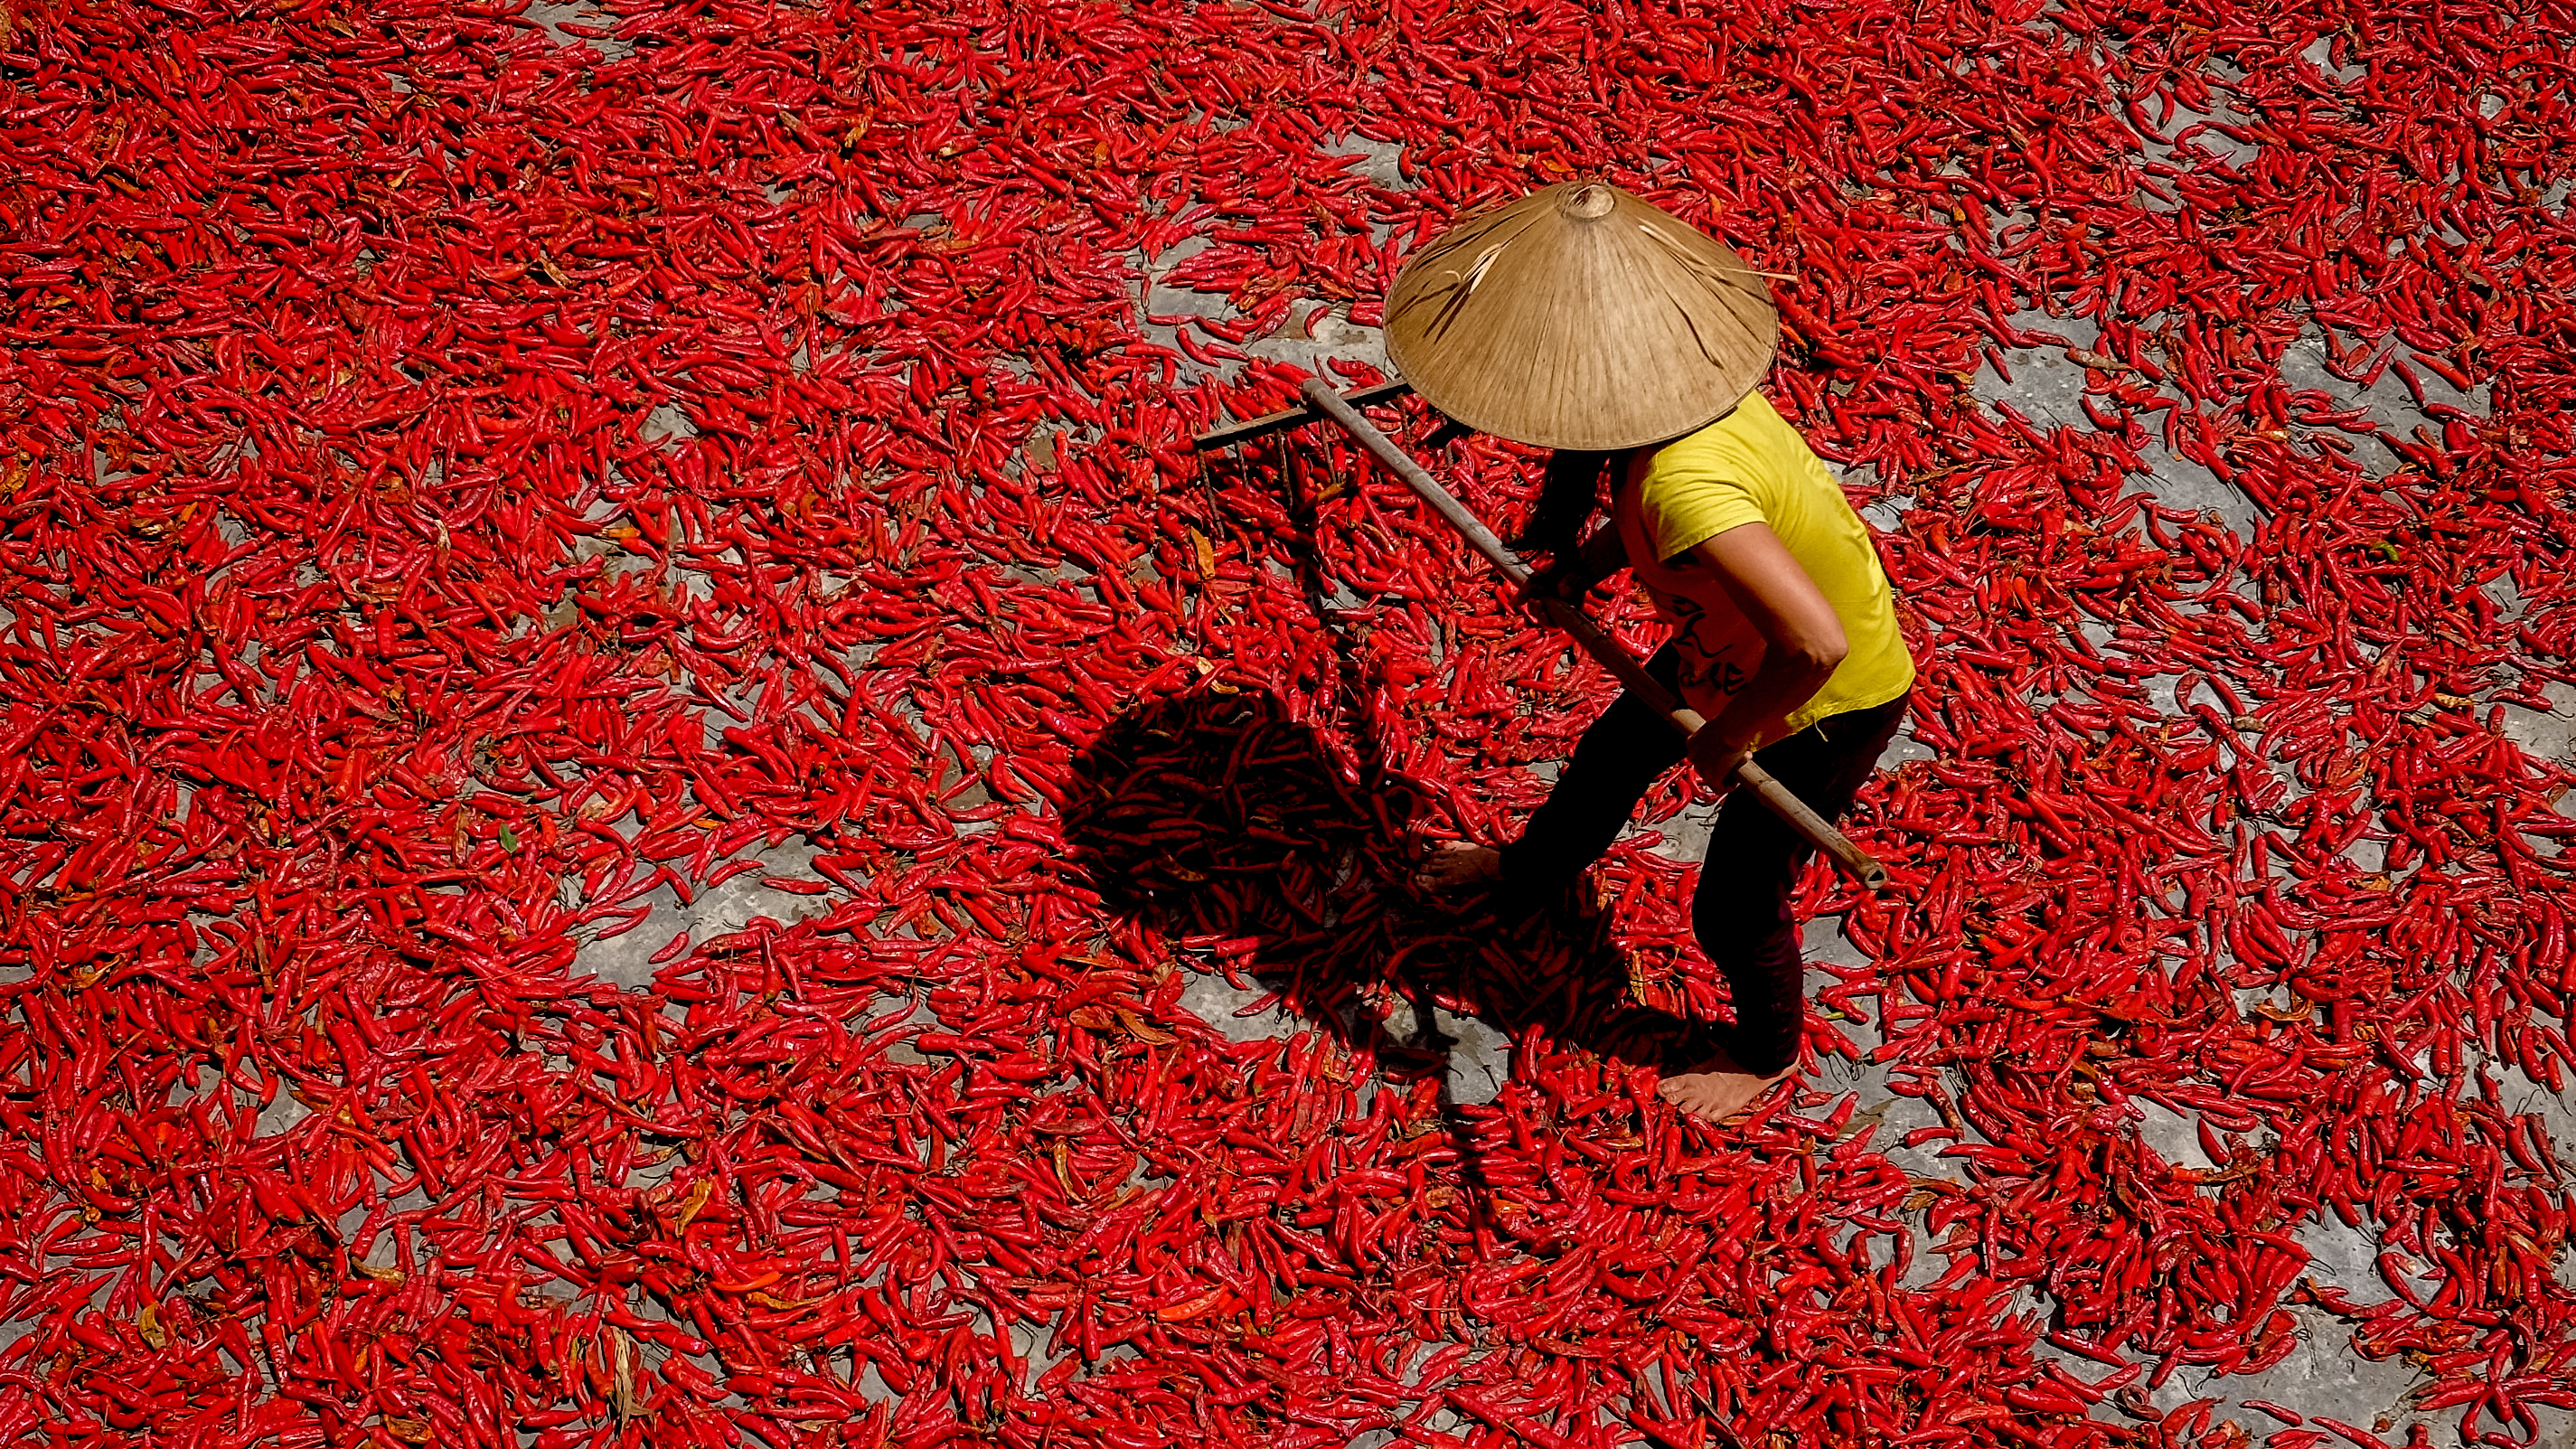 A picture from above looking down at a farmer laying out bright red hot peppers.